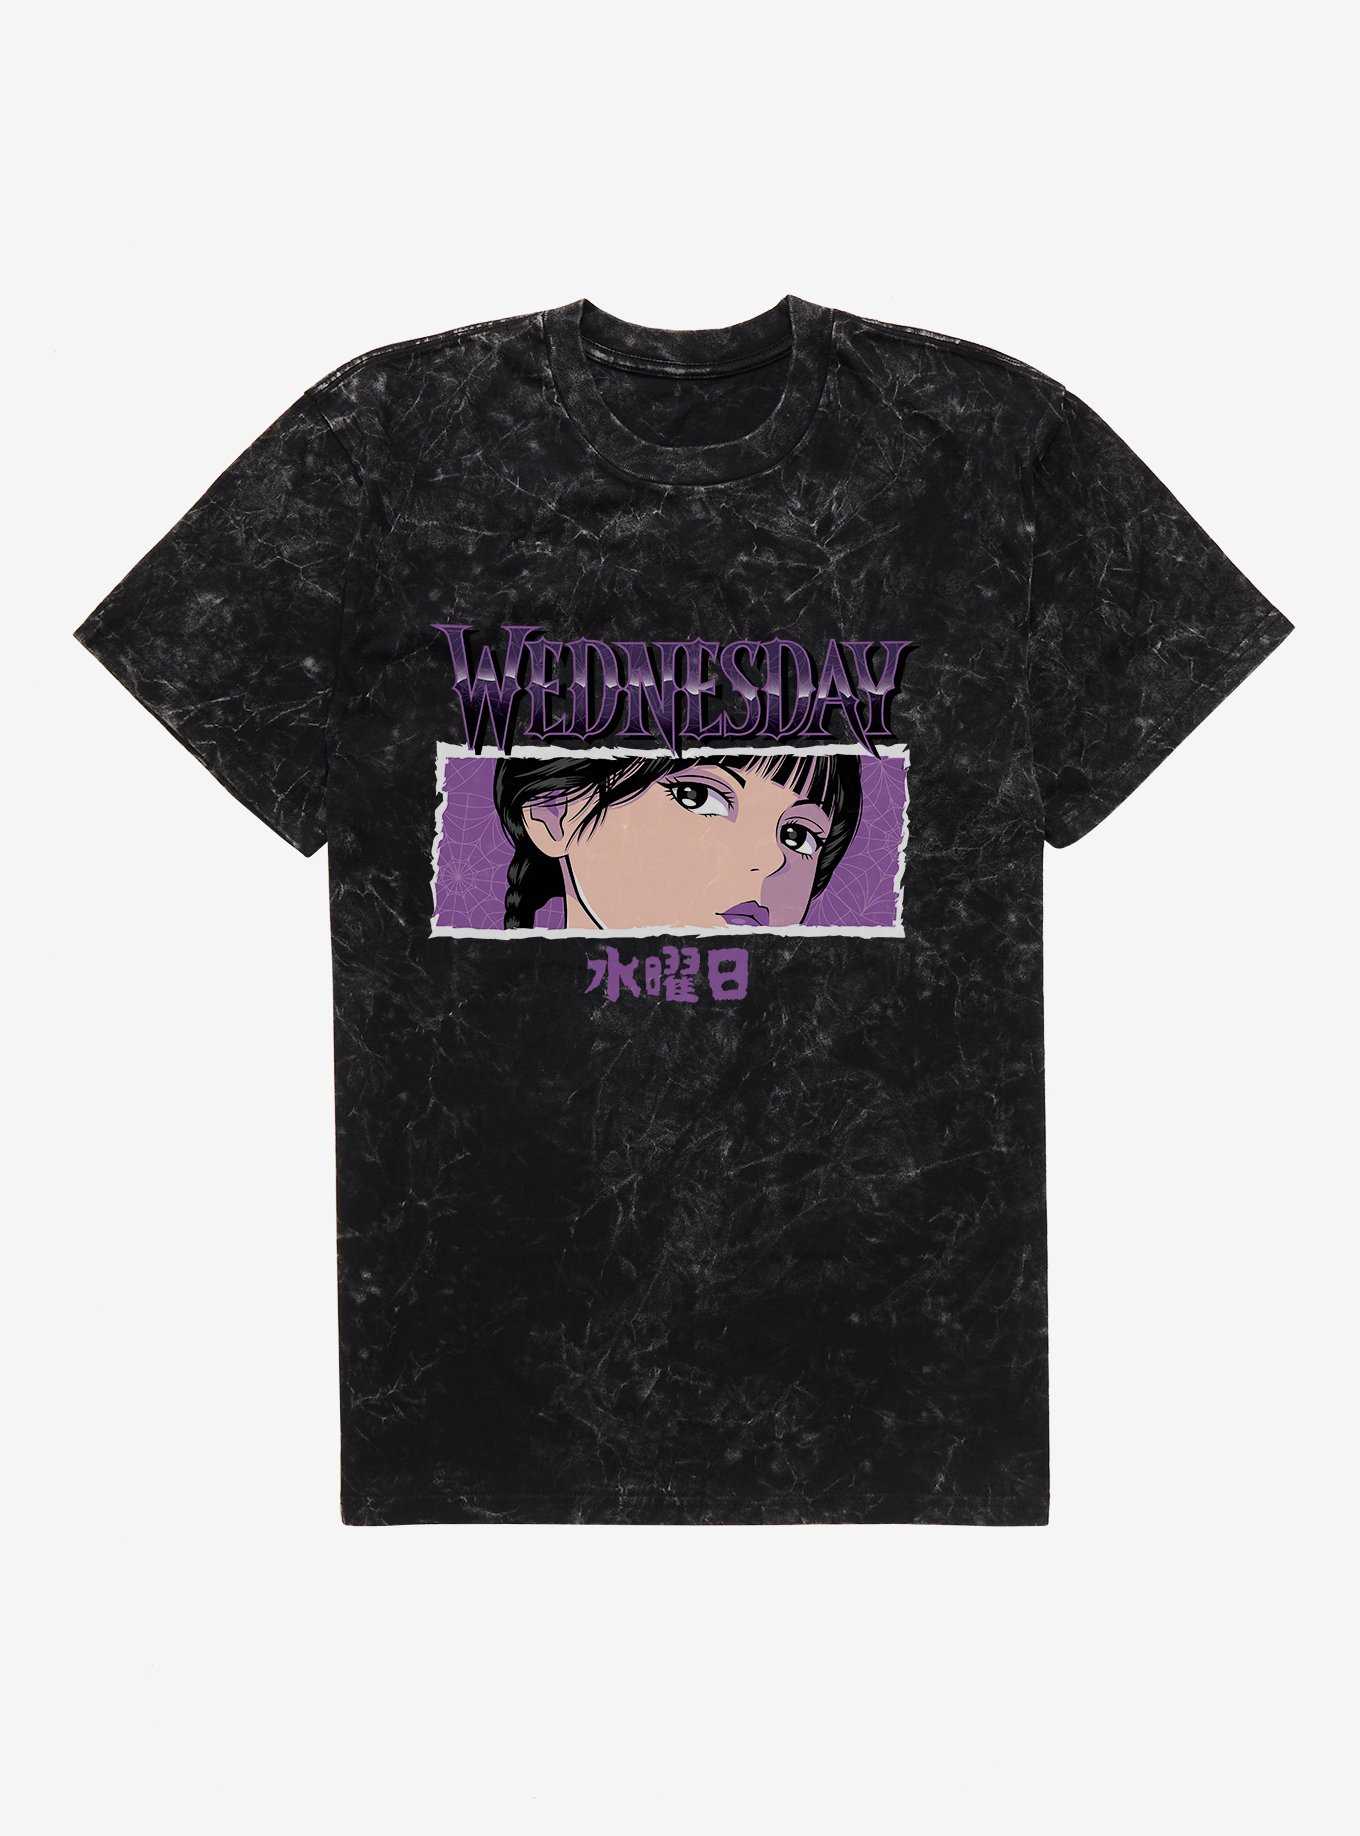 Wednesday Anime Glare Mineral Wash T-Shirt, , hi-res